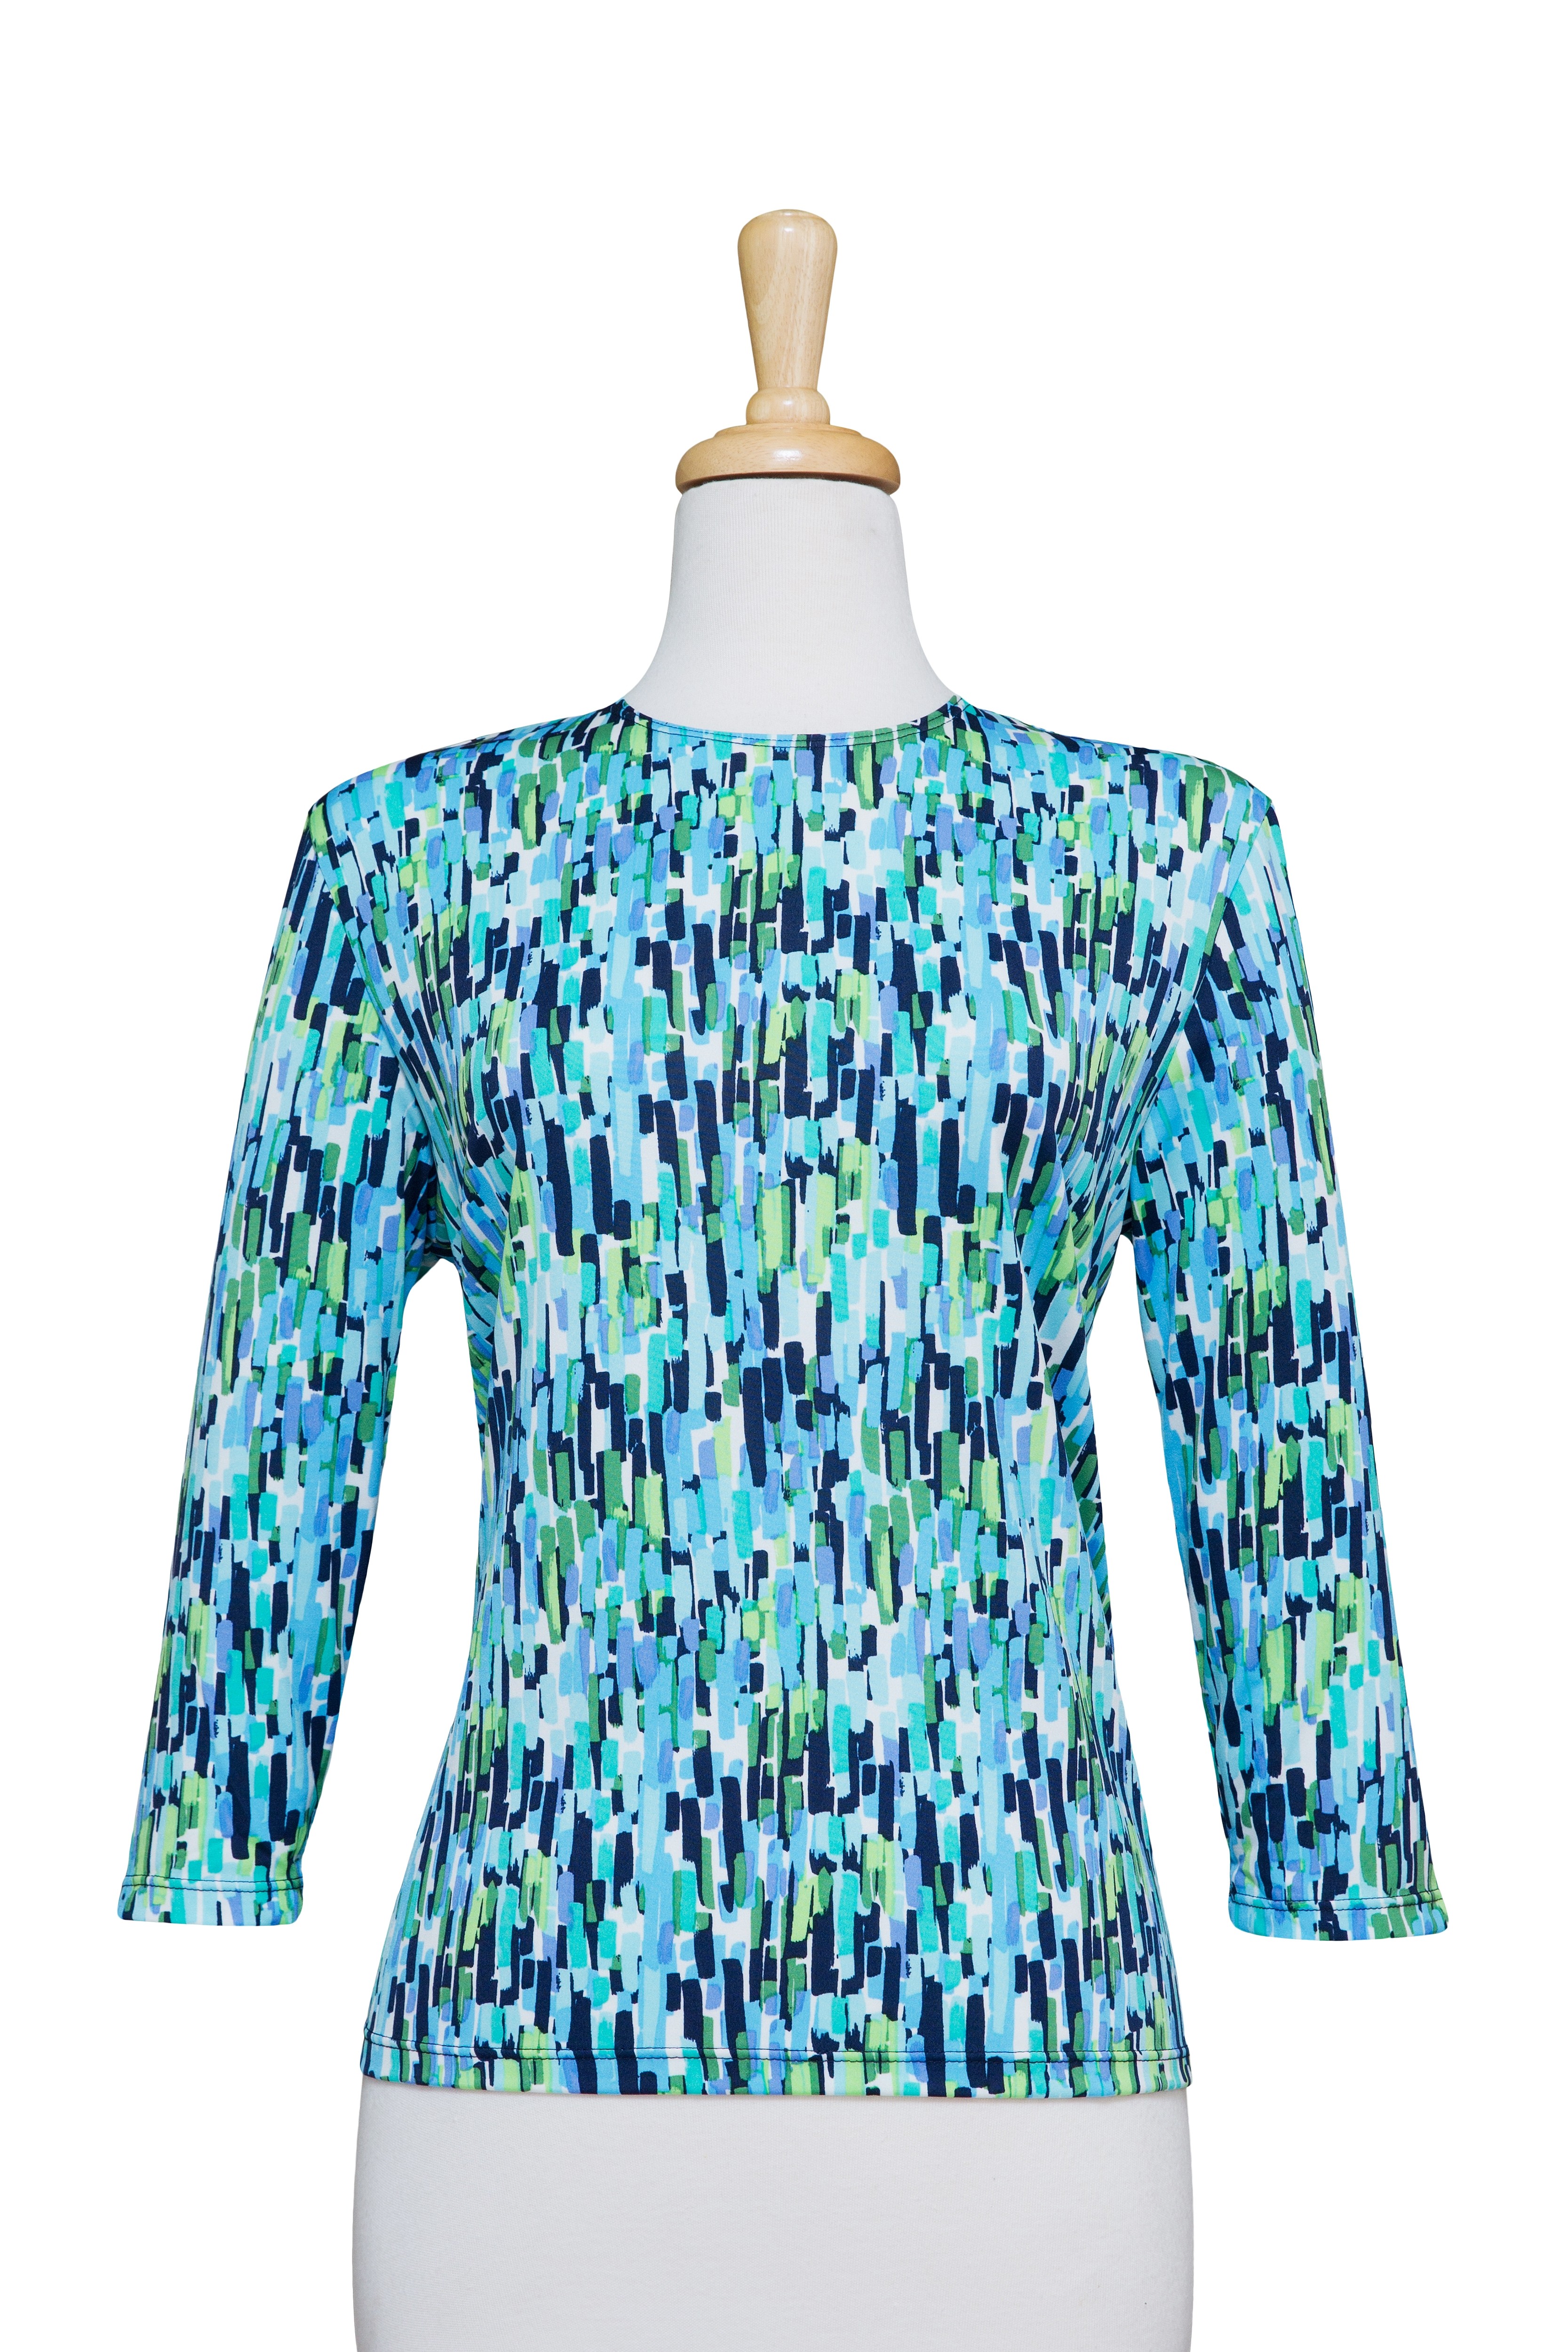 Blue, Green, Black and White Matchsticks Microfiber 3/4 Sleeve Top 